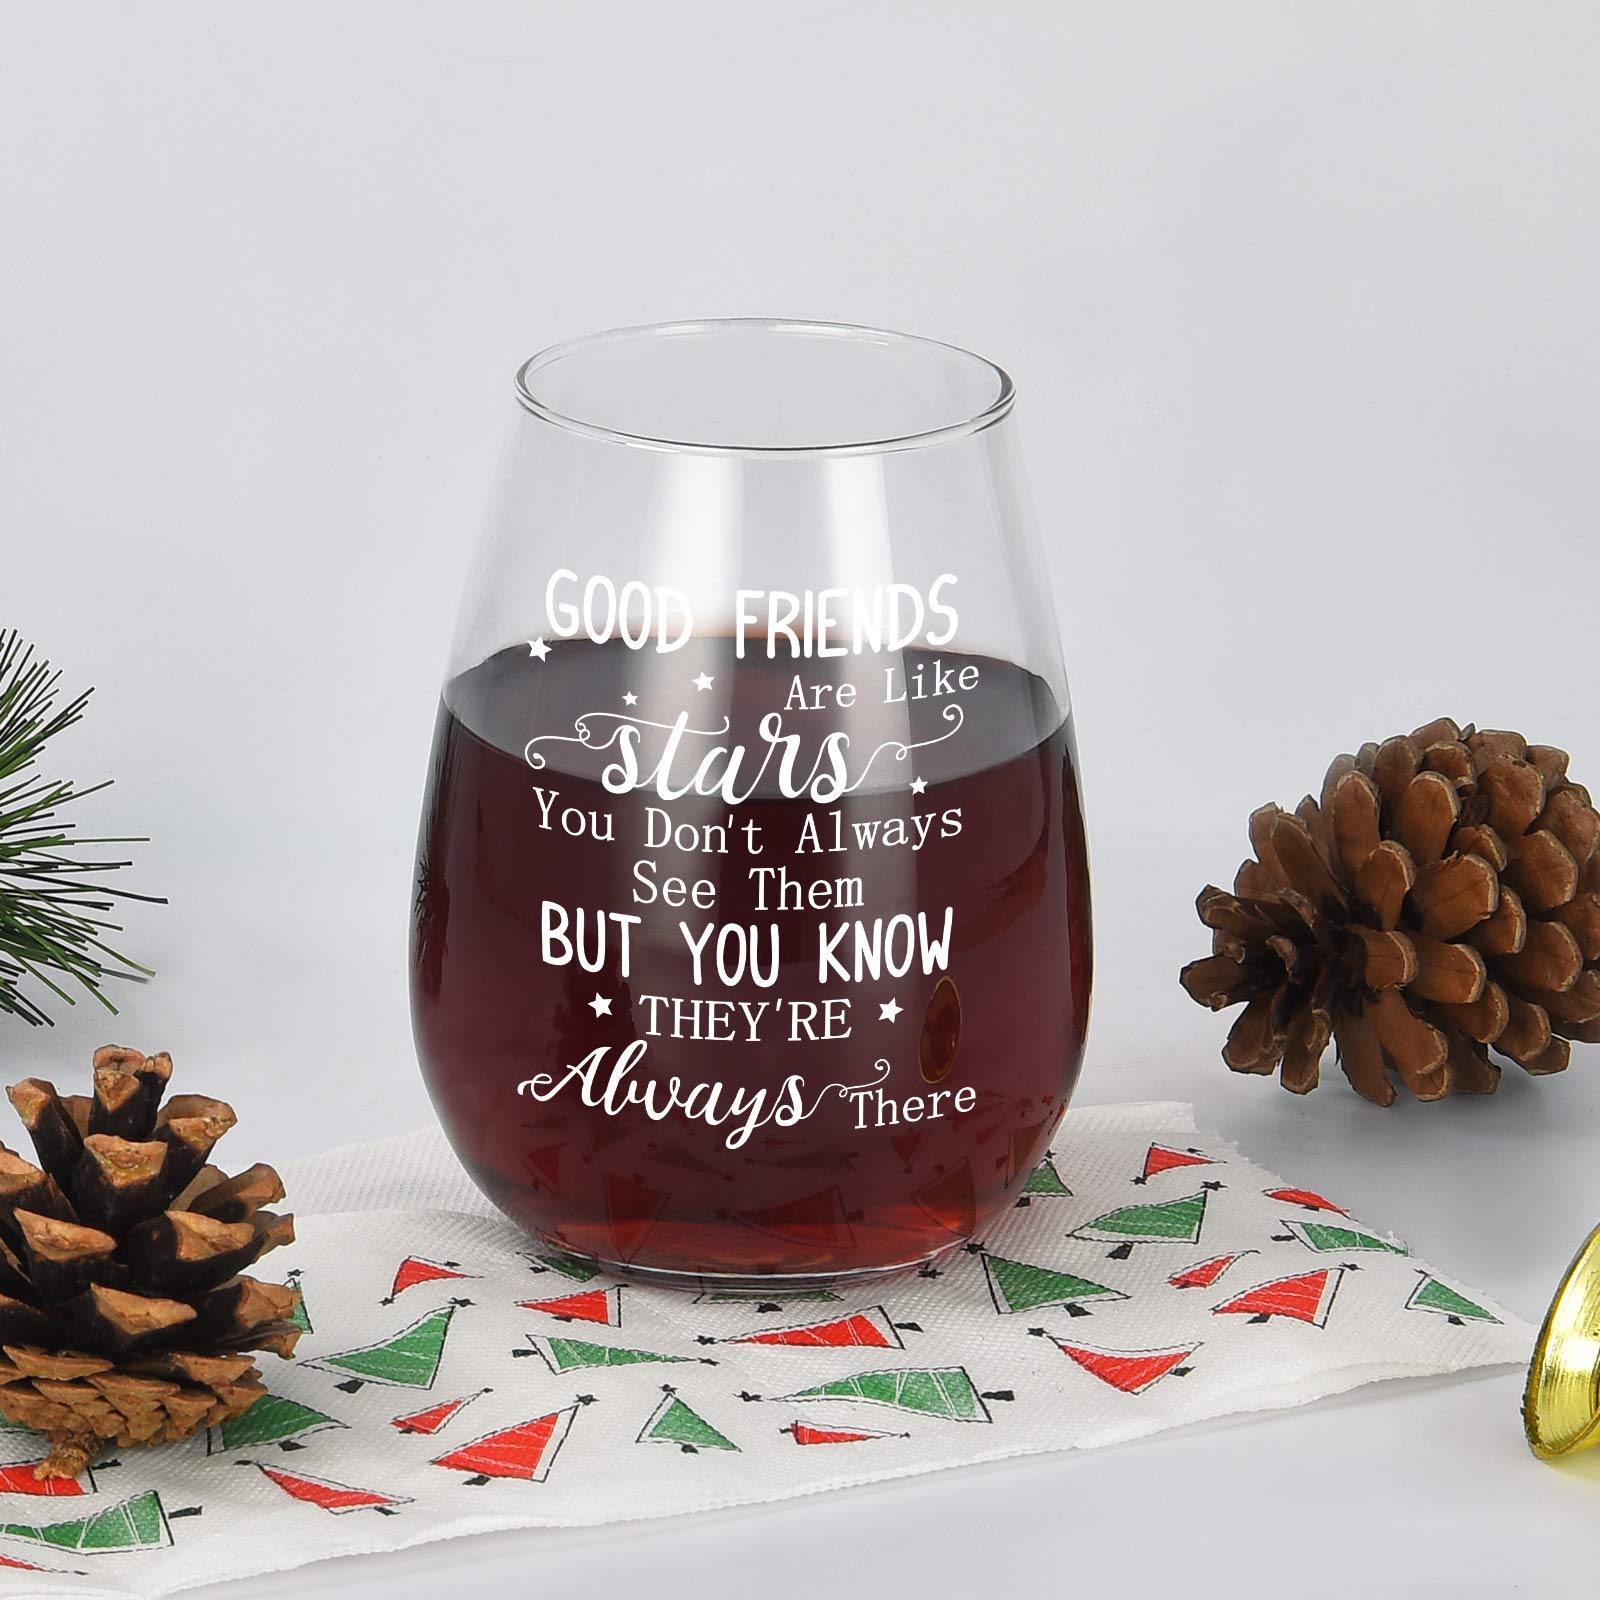 Friend Gift - Friend Stemless Wine Glass 15Oz, Good Friends Are Like Stars Wine Glass for Women, Sisters, Girls, Best Friends, Soul Sister, Gift Idea for Christmas, Birthday, Galentine's Day